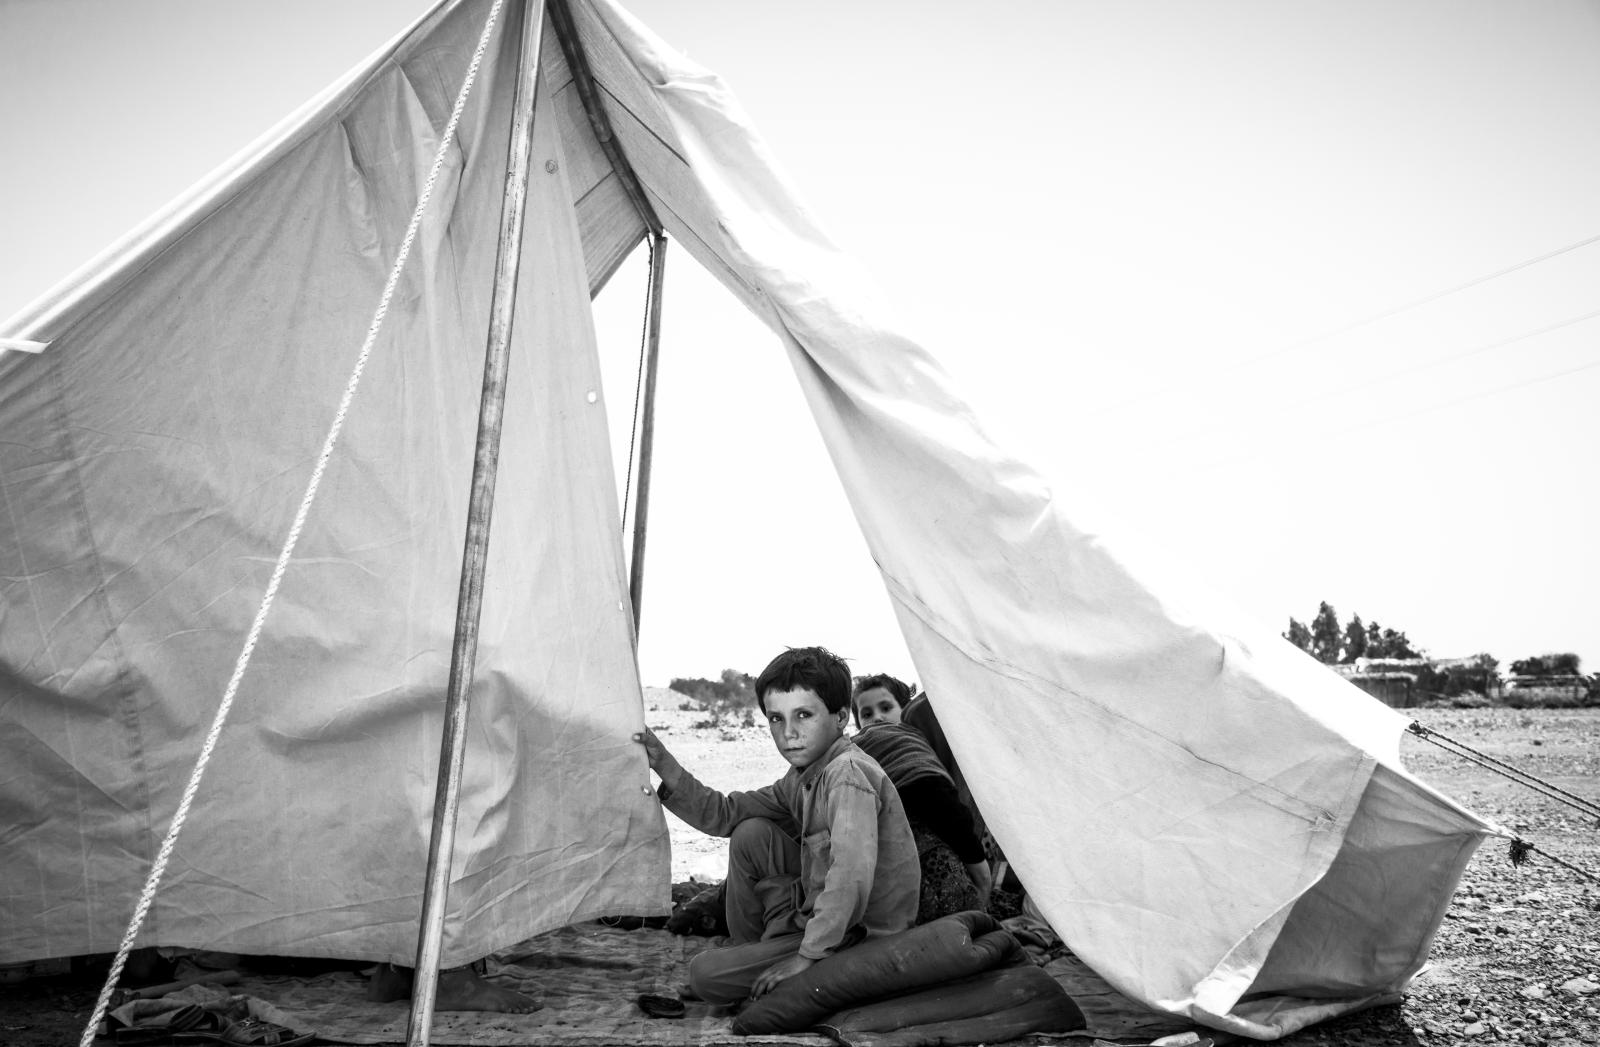 Balochistan Relief Camp | Buy this image